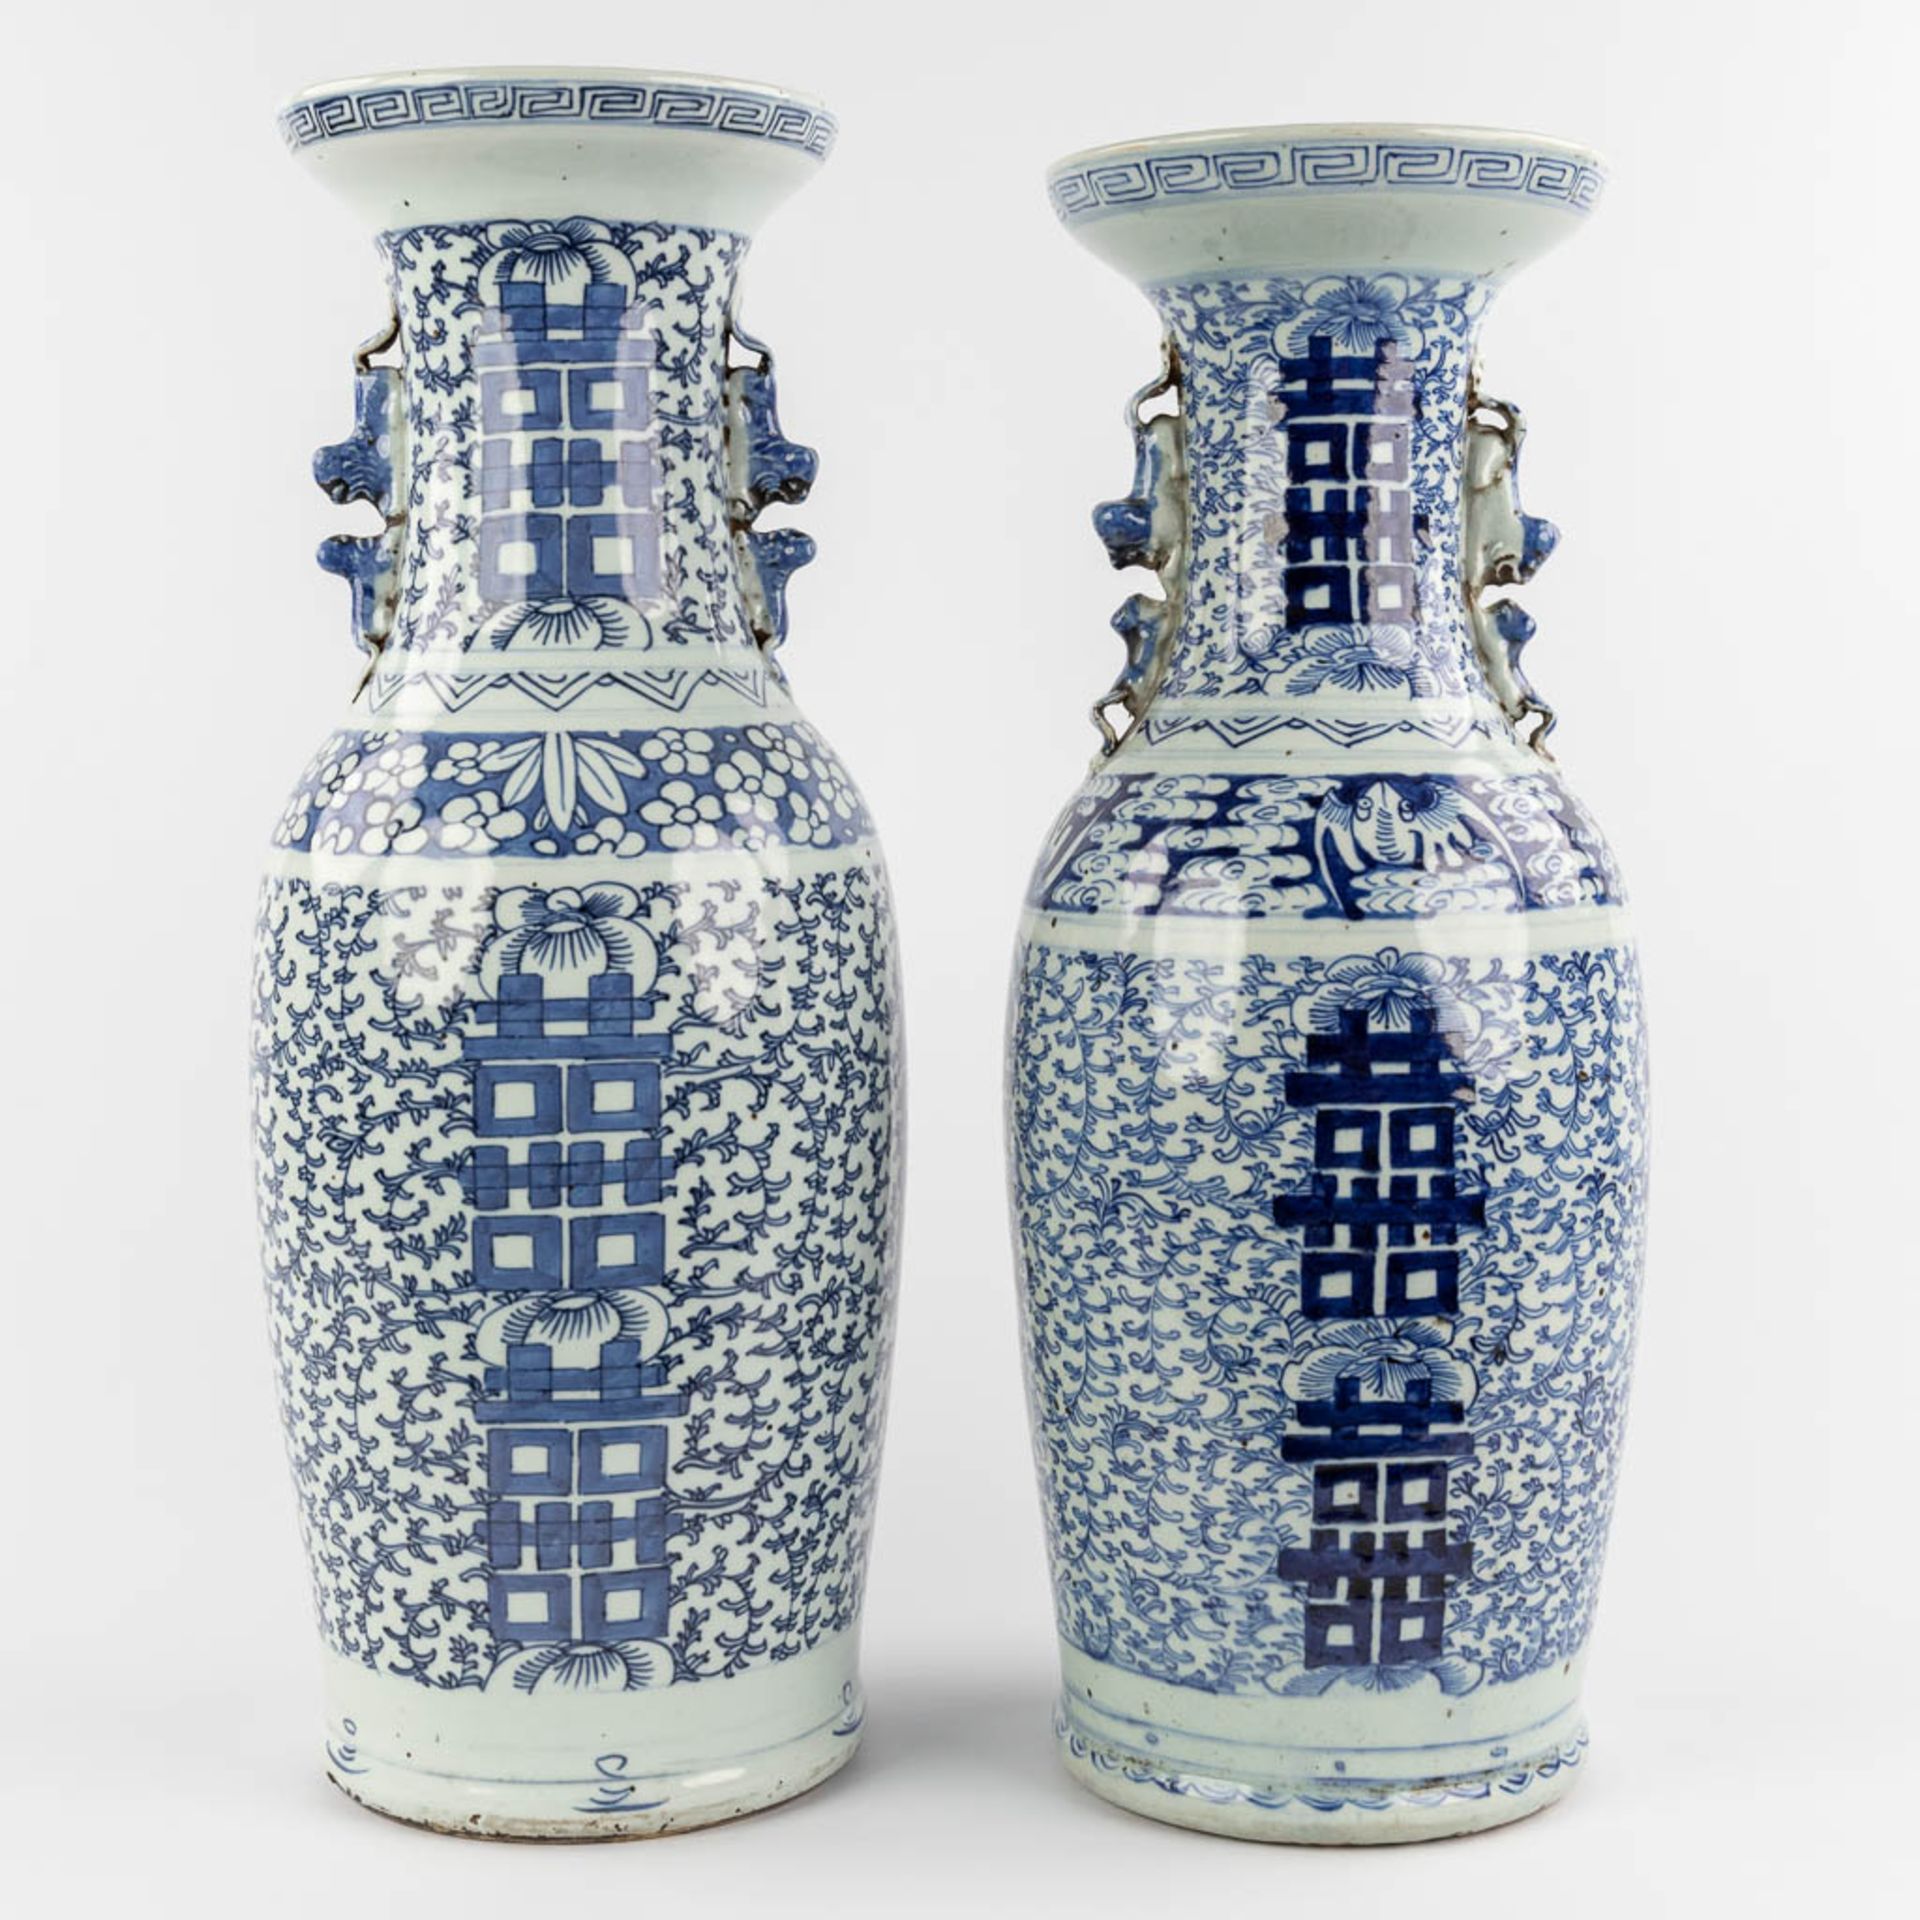 Two Chinese vases with blue-white double xi-sign of happiness. 19th/20th C. (H:60 x D:21 cm) - Image 5 of 12